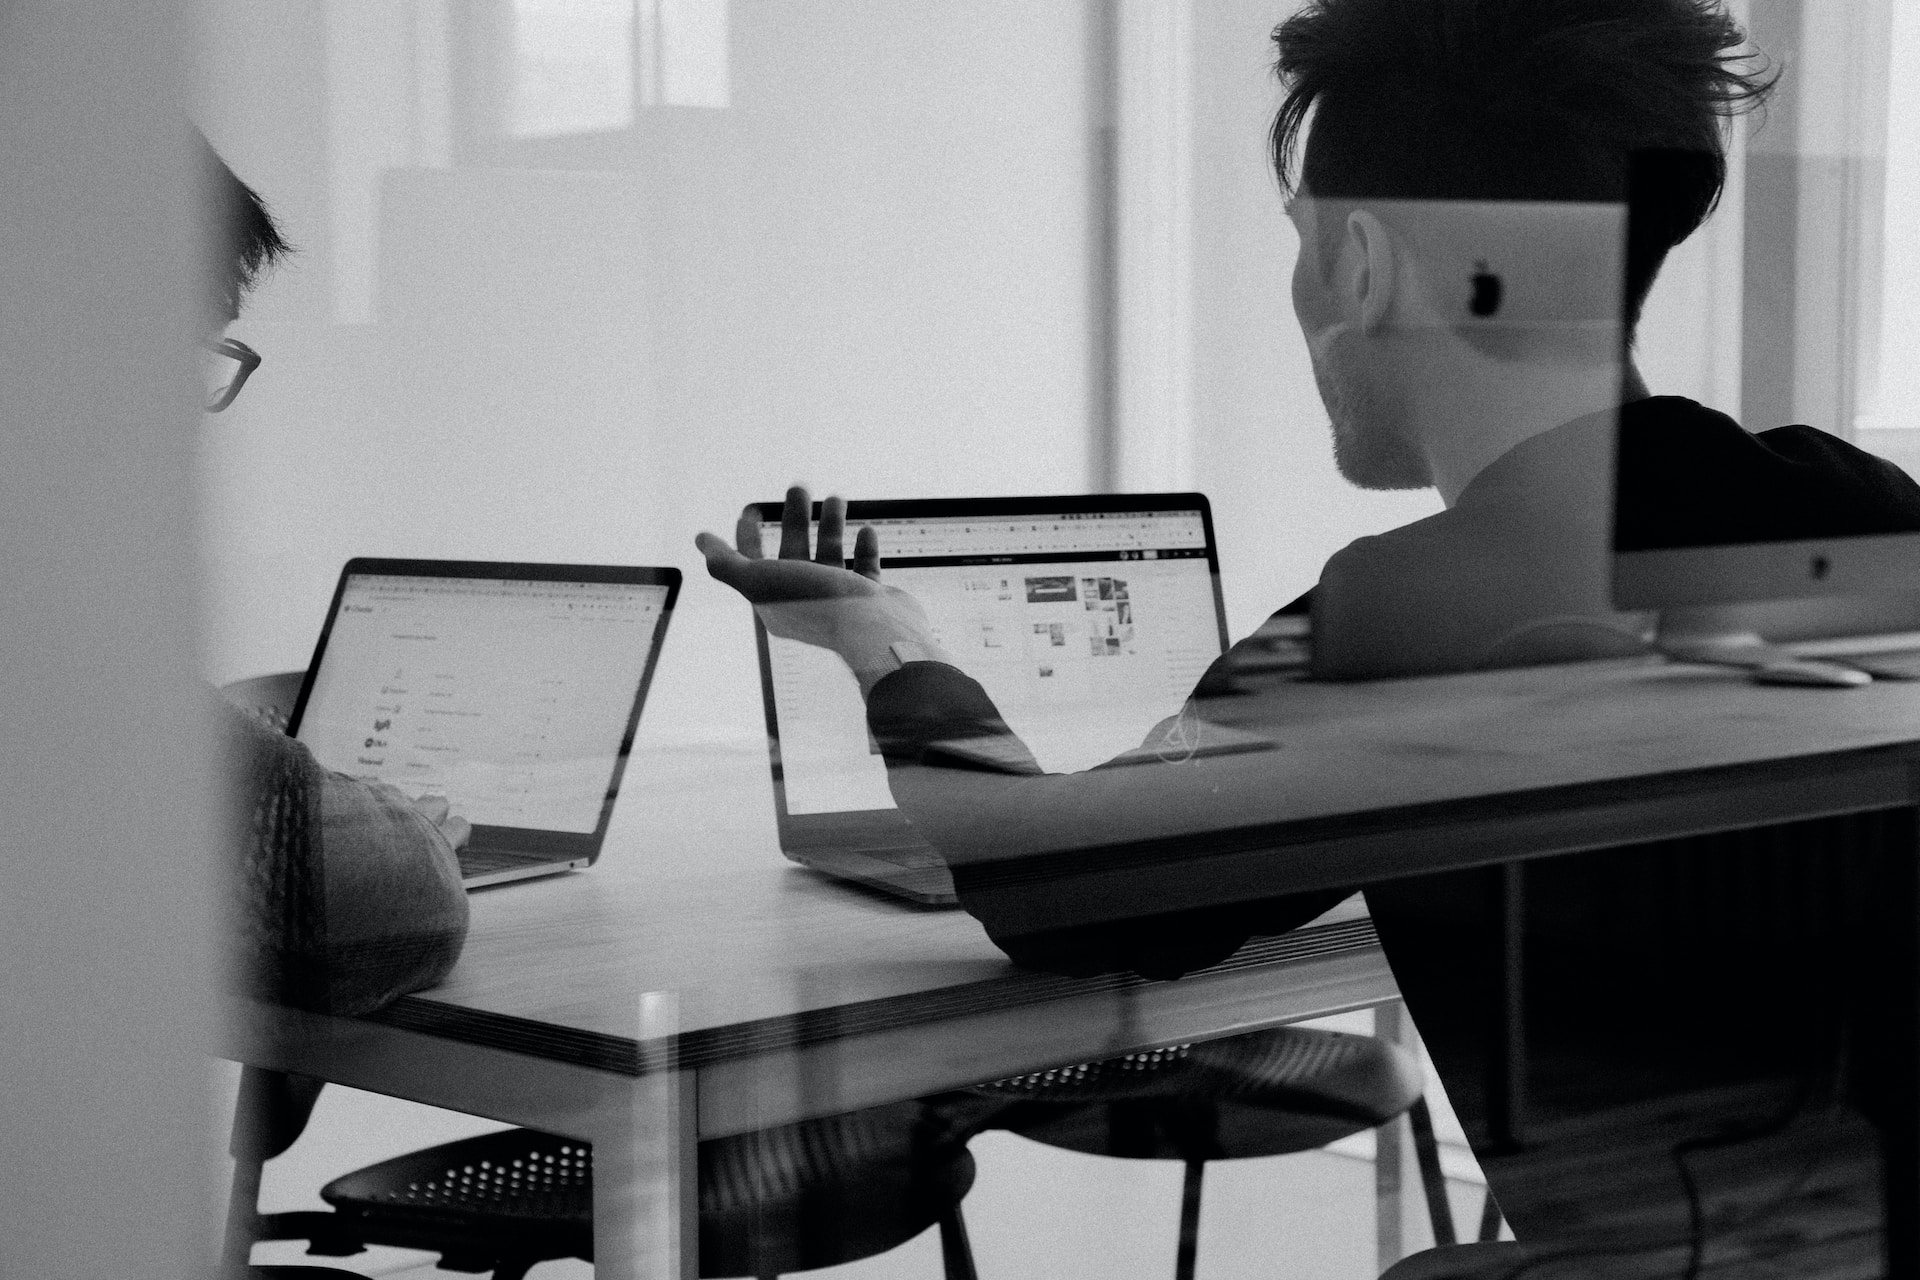 Black and white photo looking through a conference room glass wall at two individuals having a discussion and working on their laptops, representing business ownership disputes